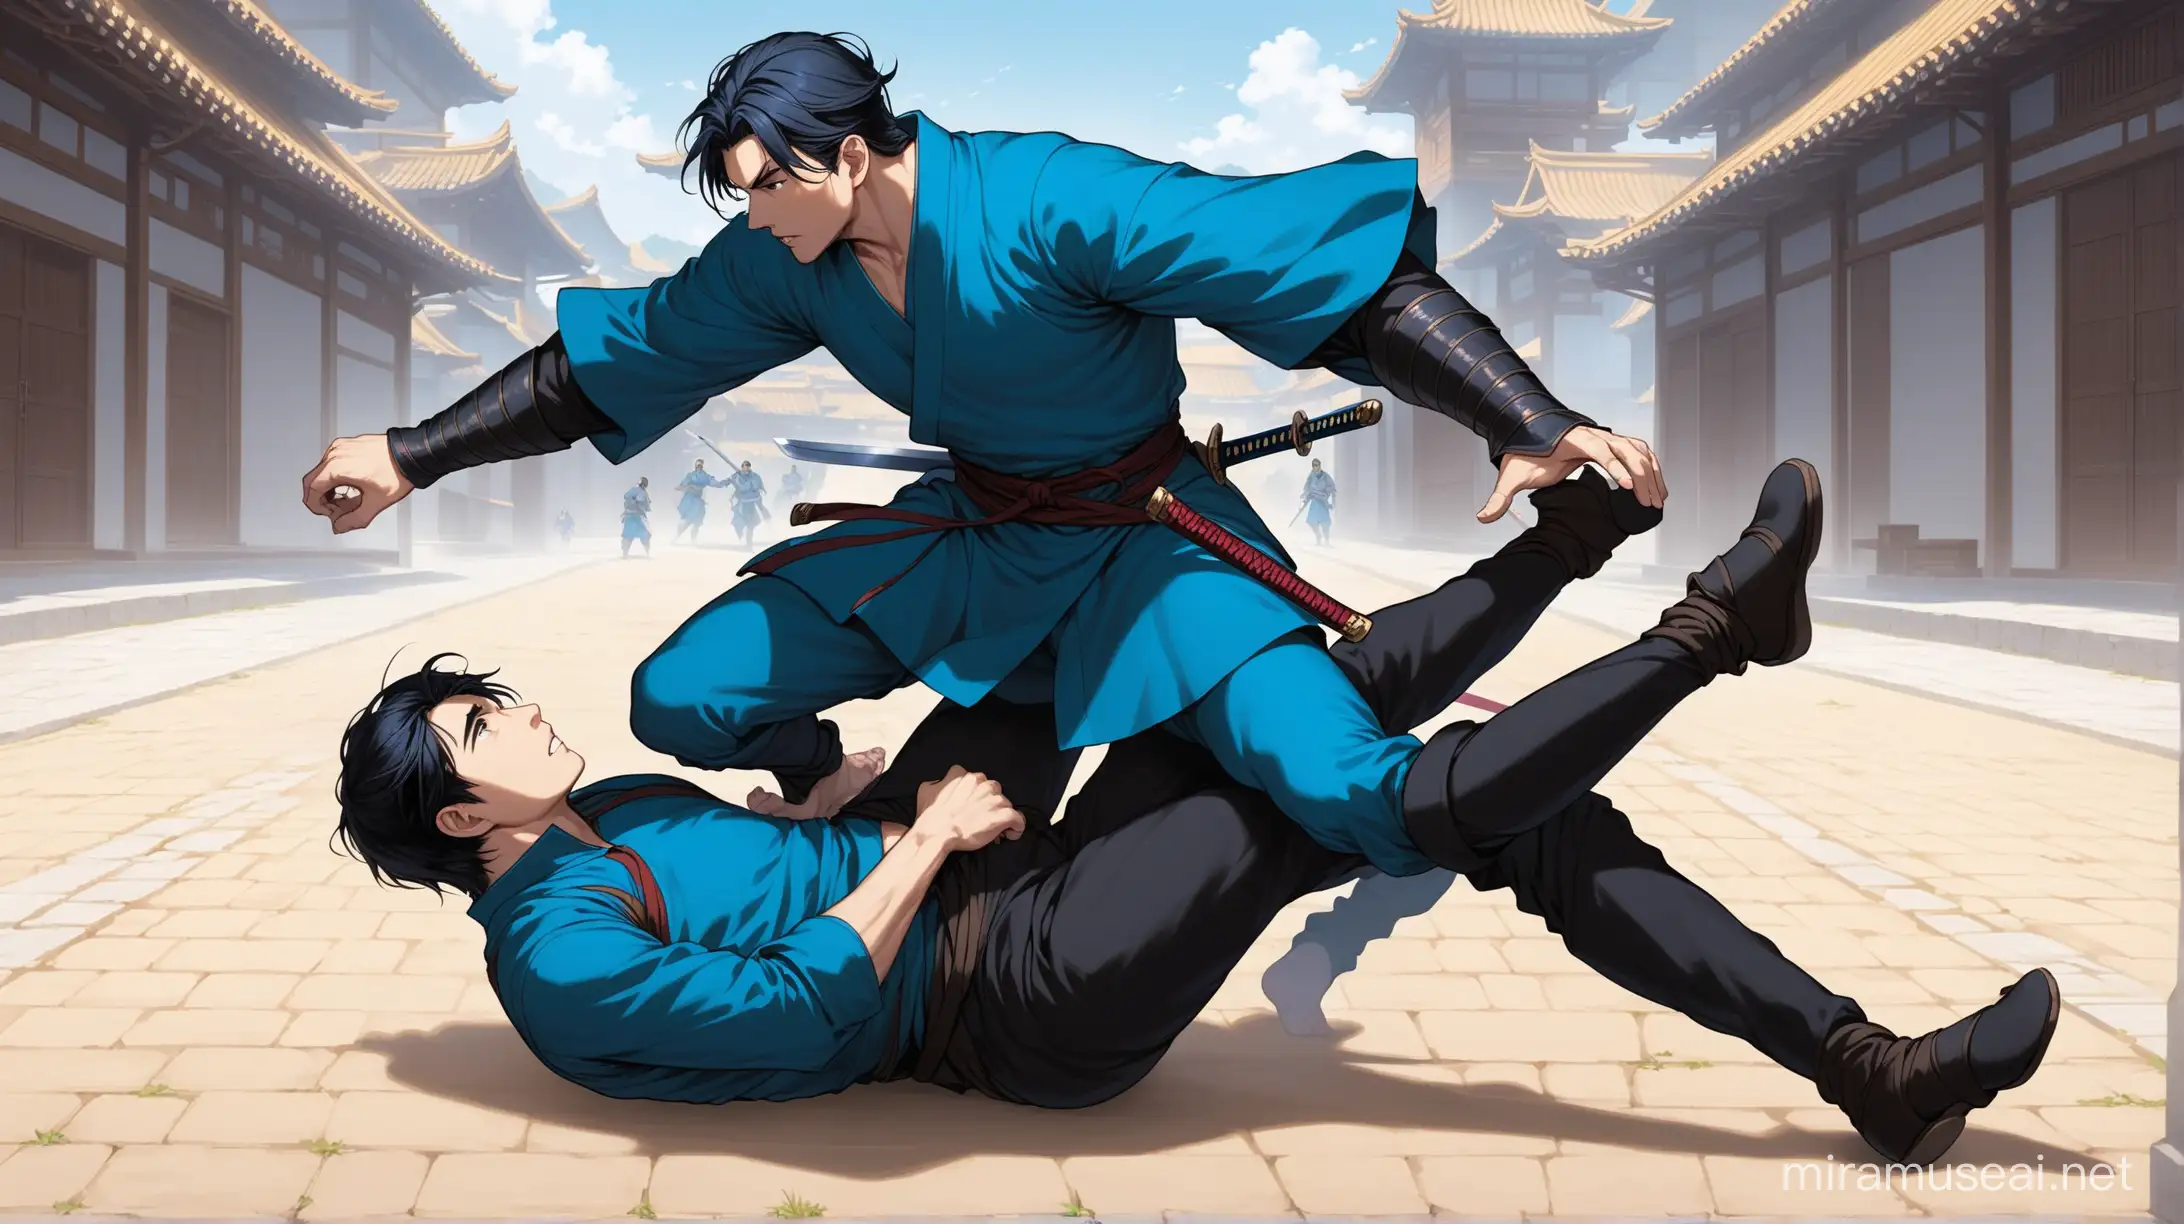 The blue-clothed swordsman jumped and rolled on the ground with his feet kicking the black-clothed one